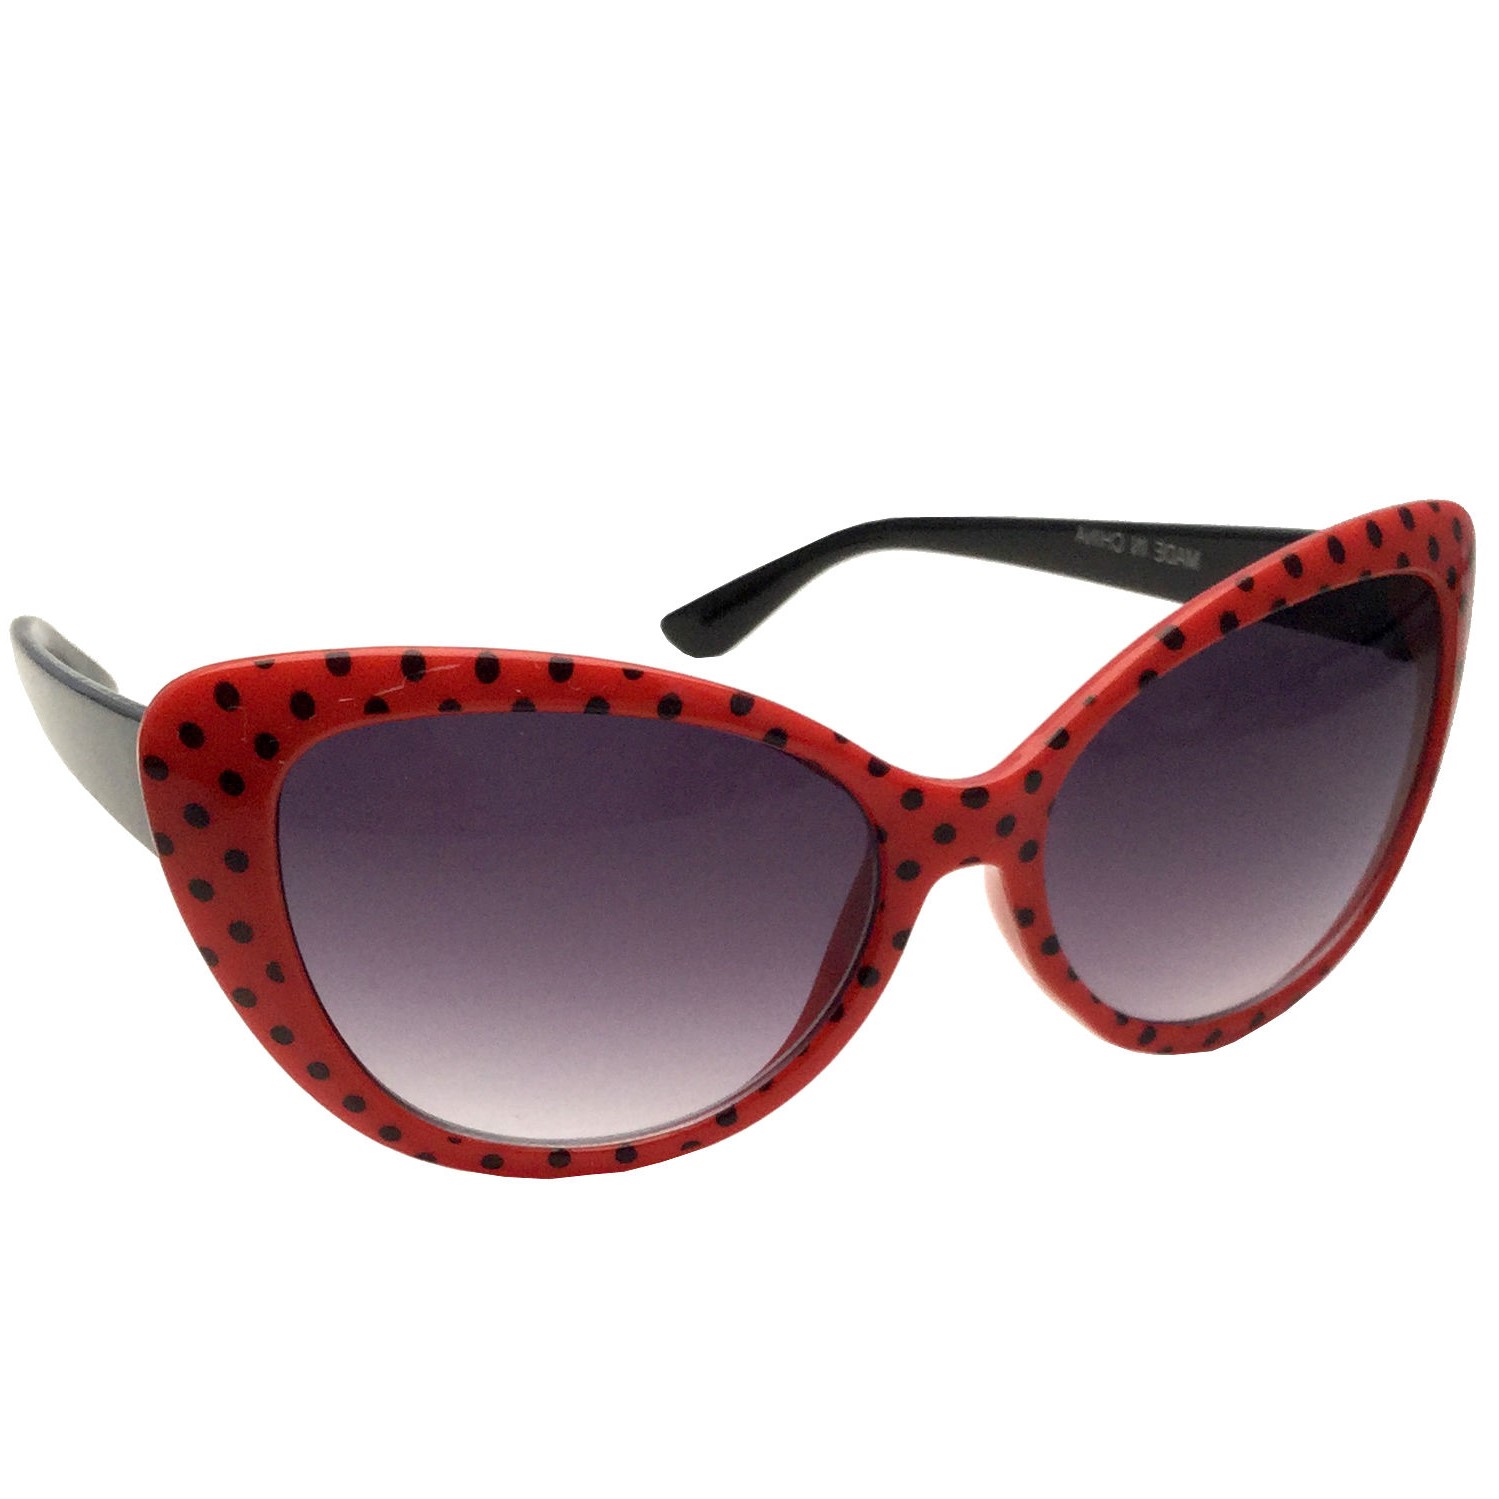 grinderPUNCH GIRLS Kids Fashion Sunglasses Cat Eye Polka Dot 50s/60s Retro Vintage Style Age 2-12 Red - image 3 of 5